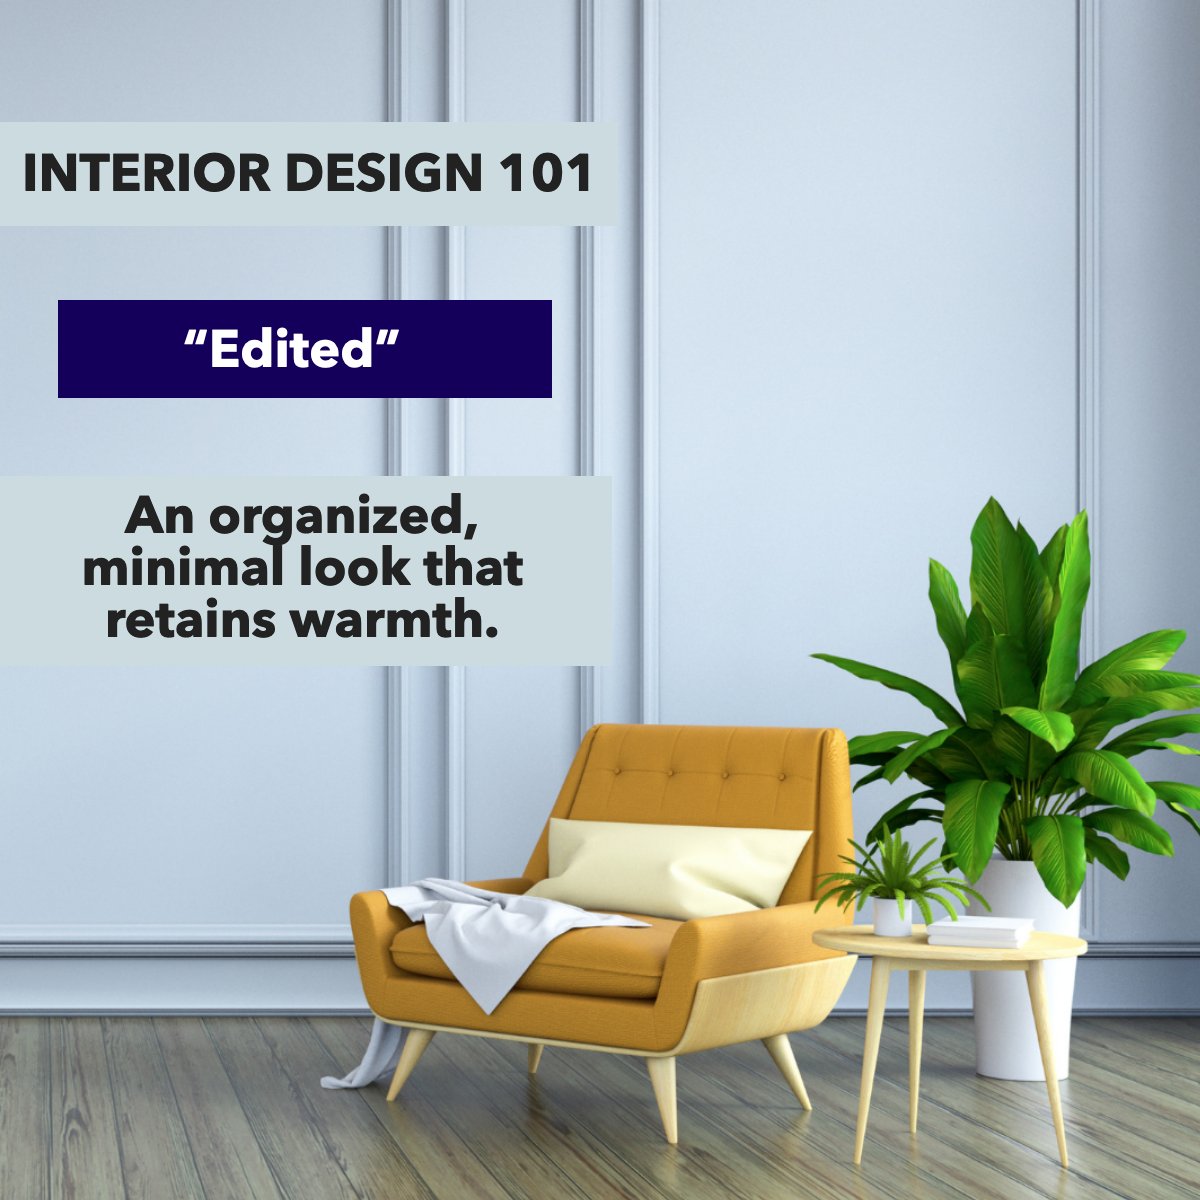 Are you into an 'Edited' style? 🤔

#interiorsdesign #interiortrends #interiordesigning #interiordesigntrends #interiorsaddict #interiordesigntips #interiordesigngoals 
 #dreamhome #homeowner #goals #homegoals #indianagoldgroup #indy #hometips #letstalk #indiana